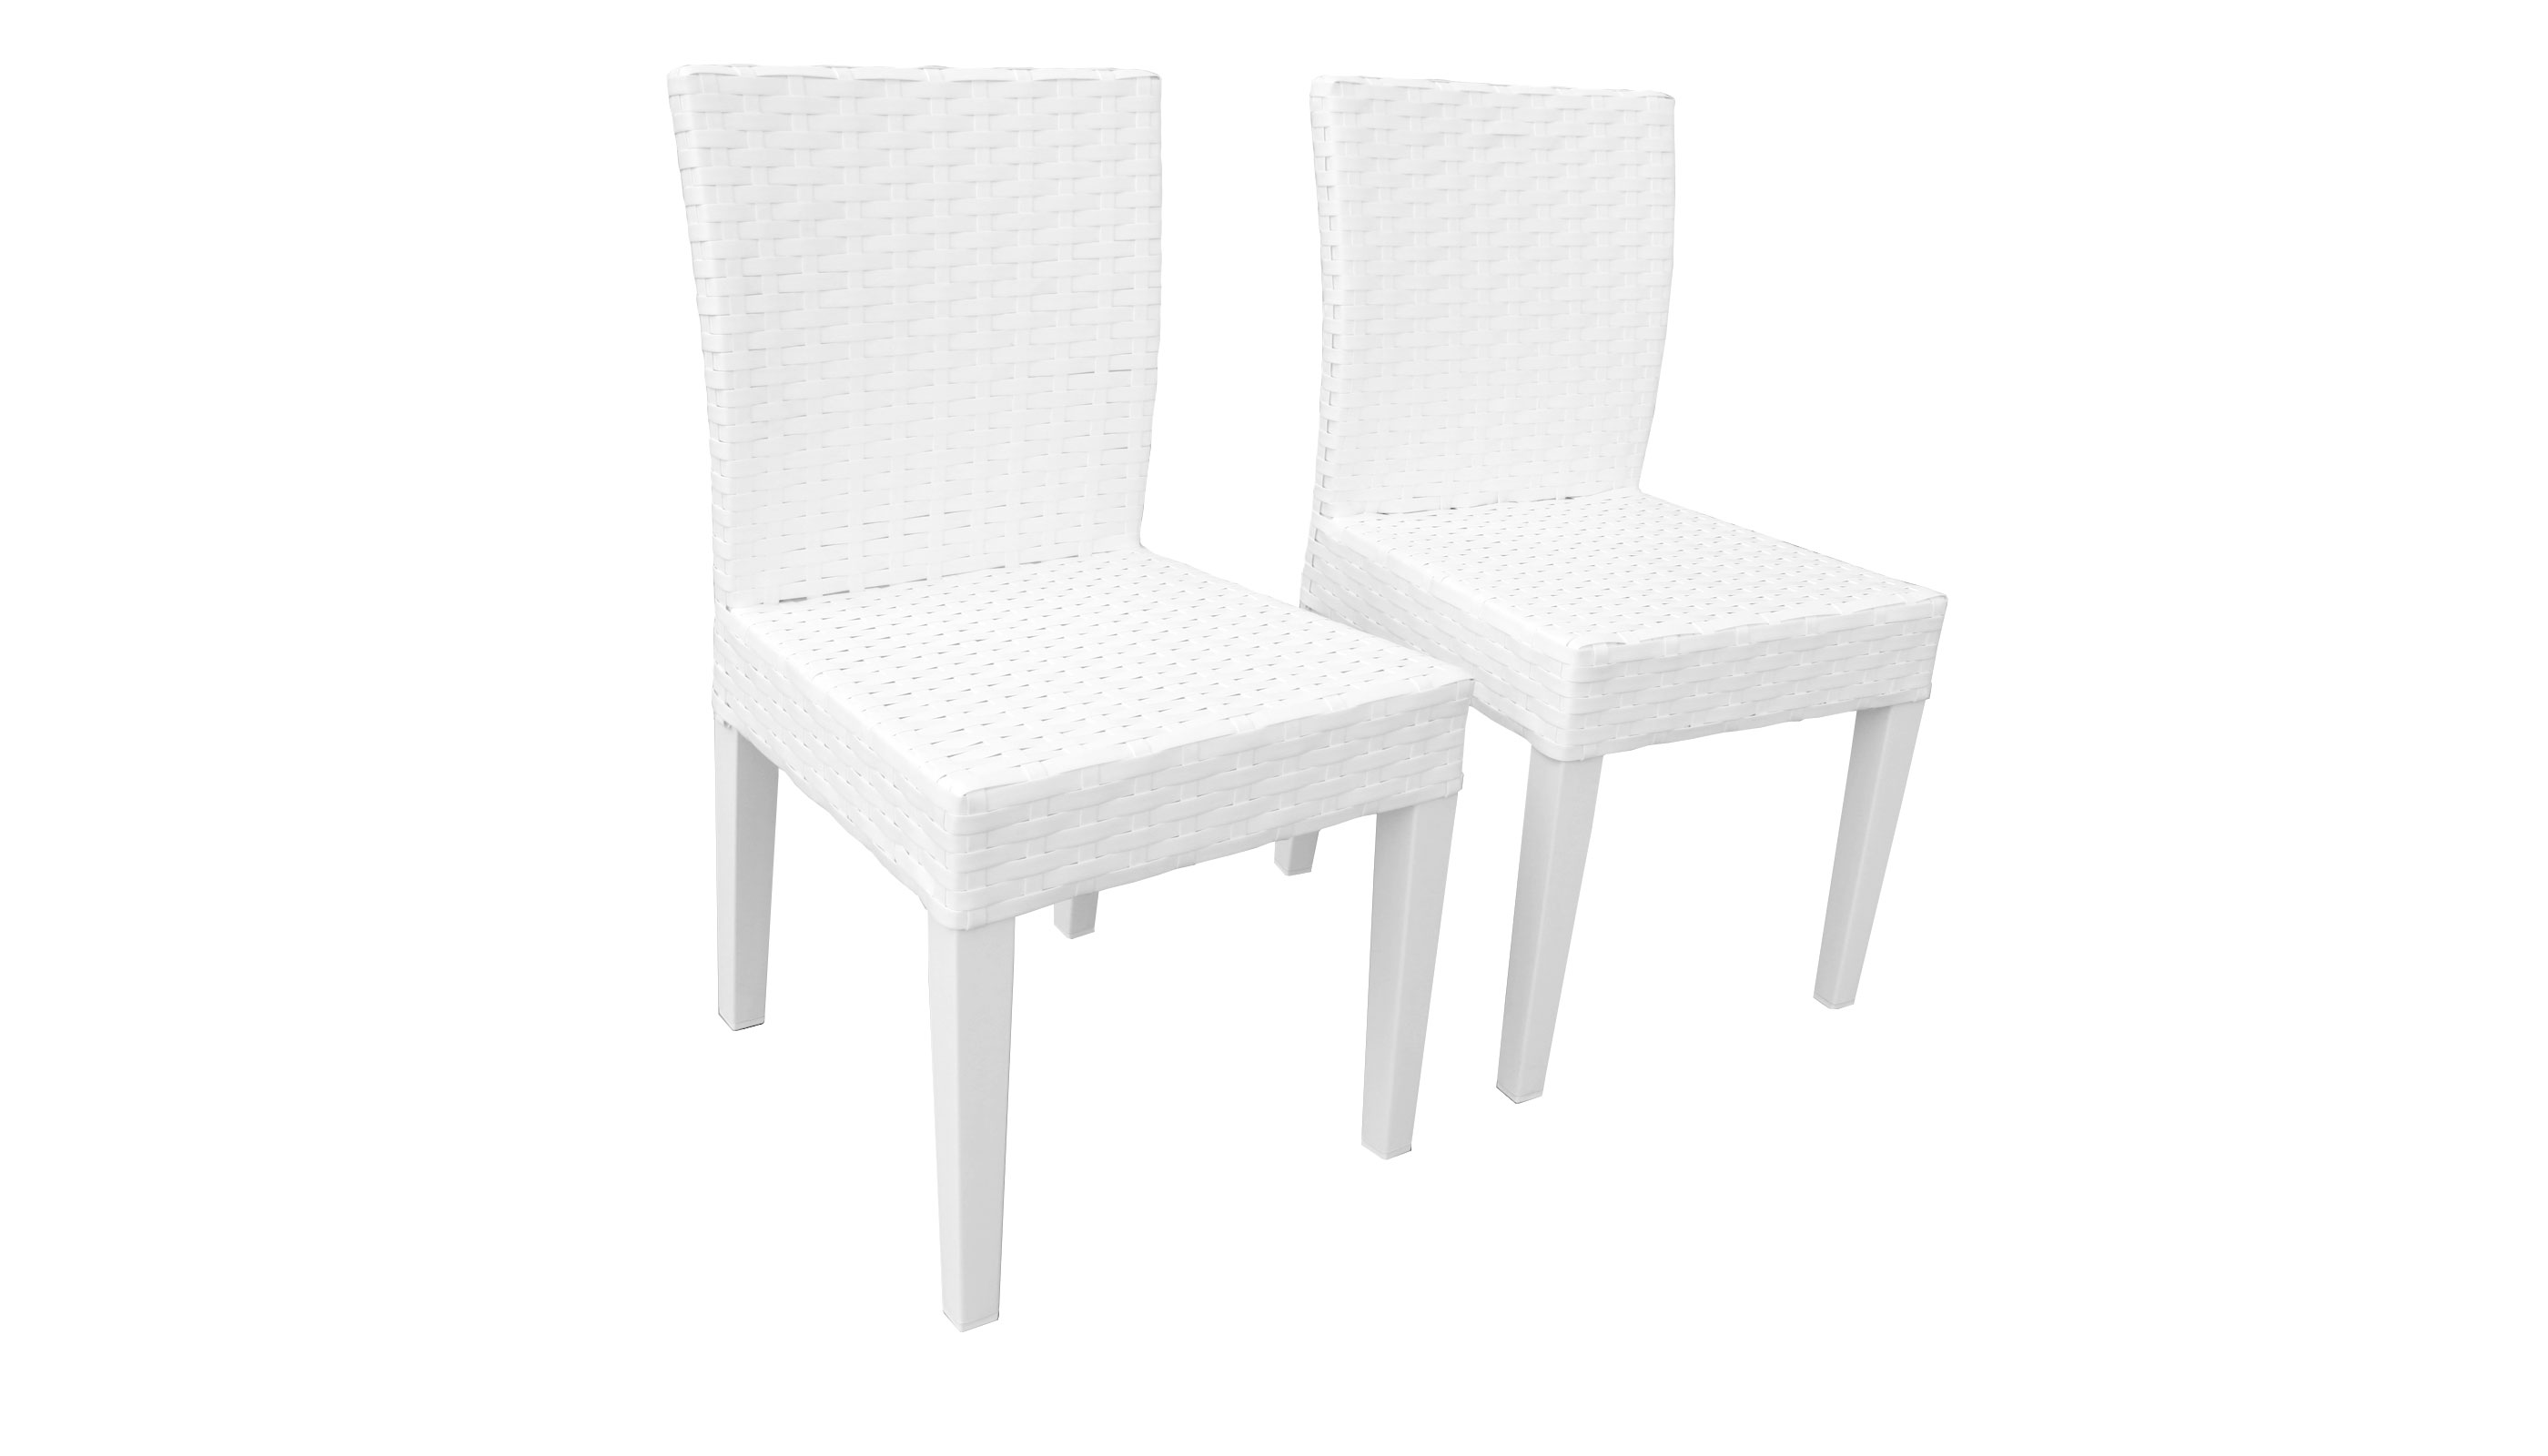 Miami Rectangular Outdoor Patio Dining Table with 8 Armless Chairs - TK Classics